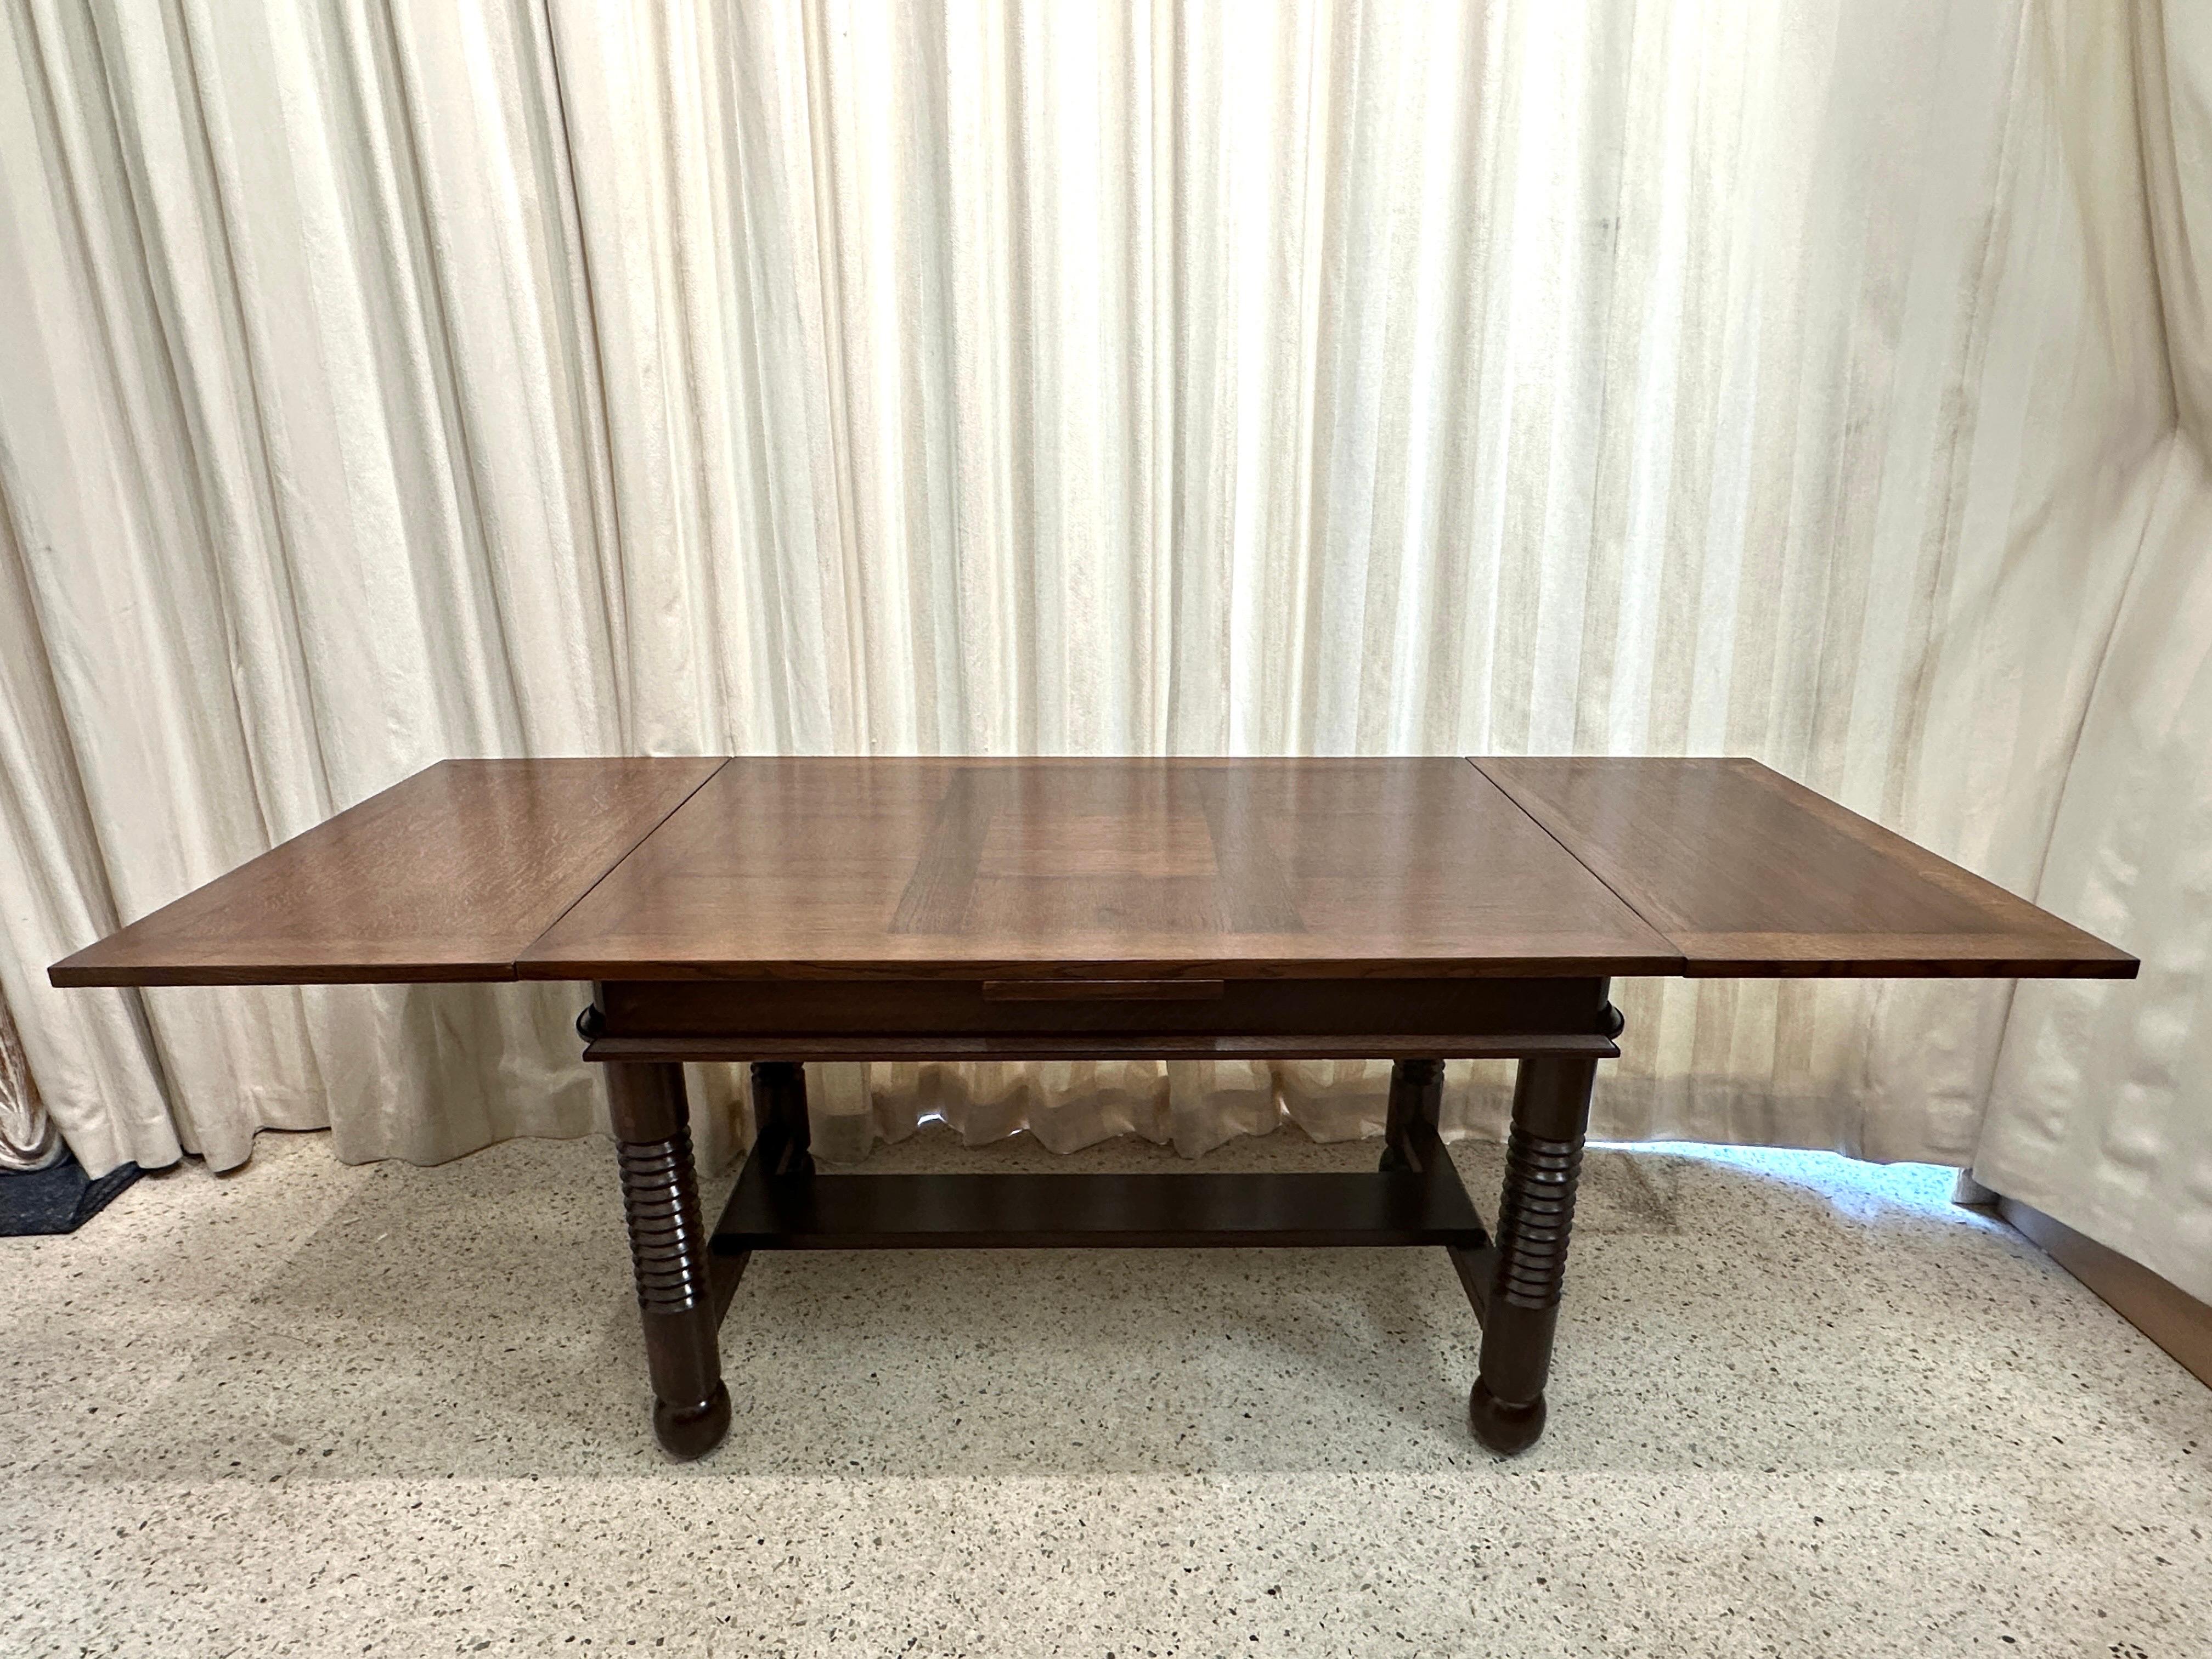 Original Vintage Art Deco Design Extendable Dining Table by Charles Dudouyt in a rich chocolate tone.  Made in France, 1940's. Solid oak constructed dining table with architecturally formed turned legs.  Exquisite marquetry table top and 2